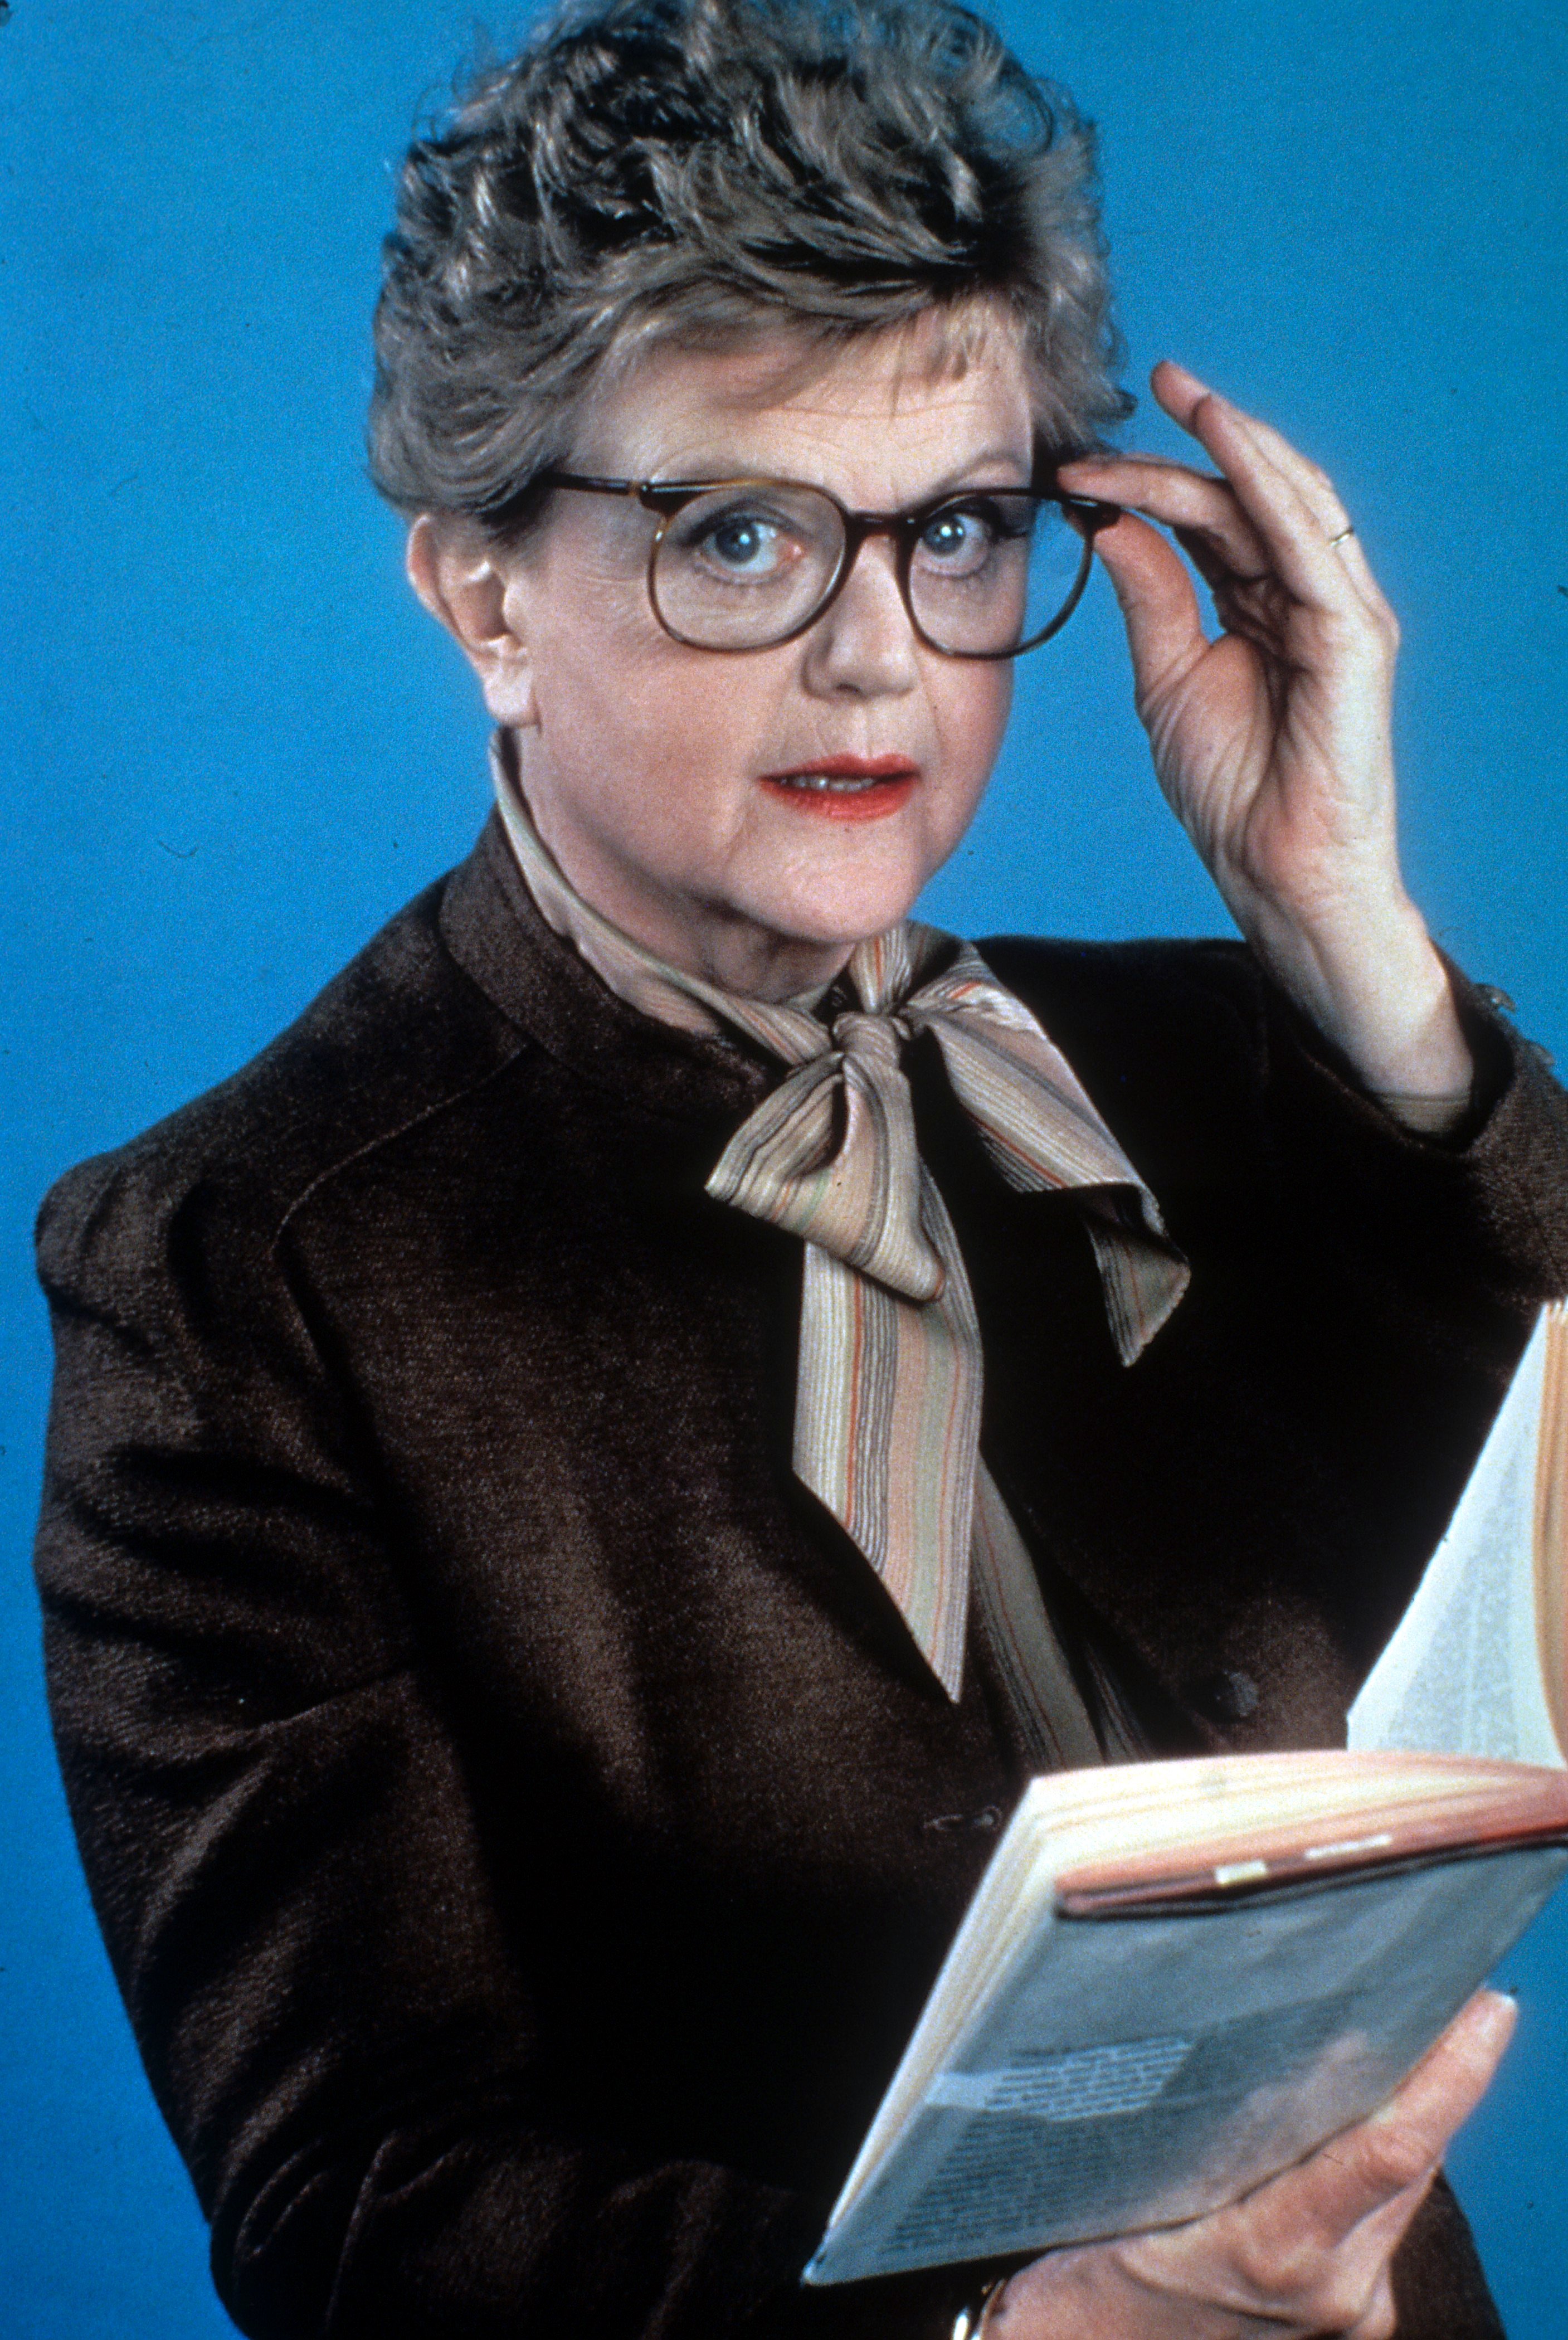 Angela Lansbury for "Murder She Wrote" circa 1984. | Source: Getty Images 